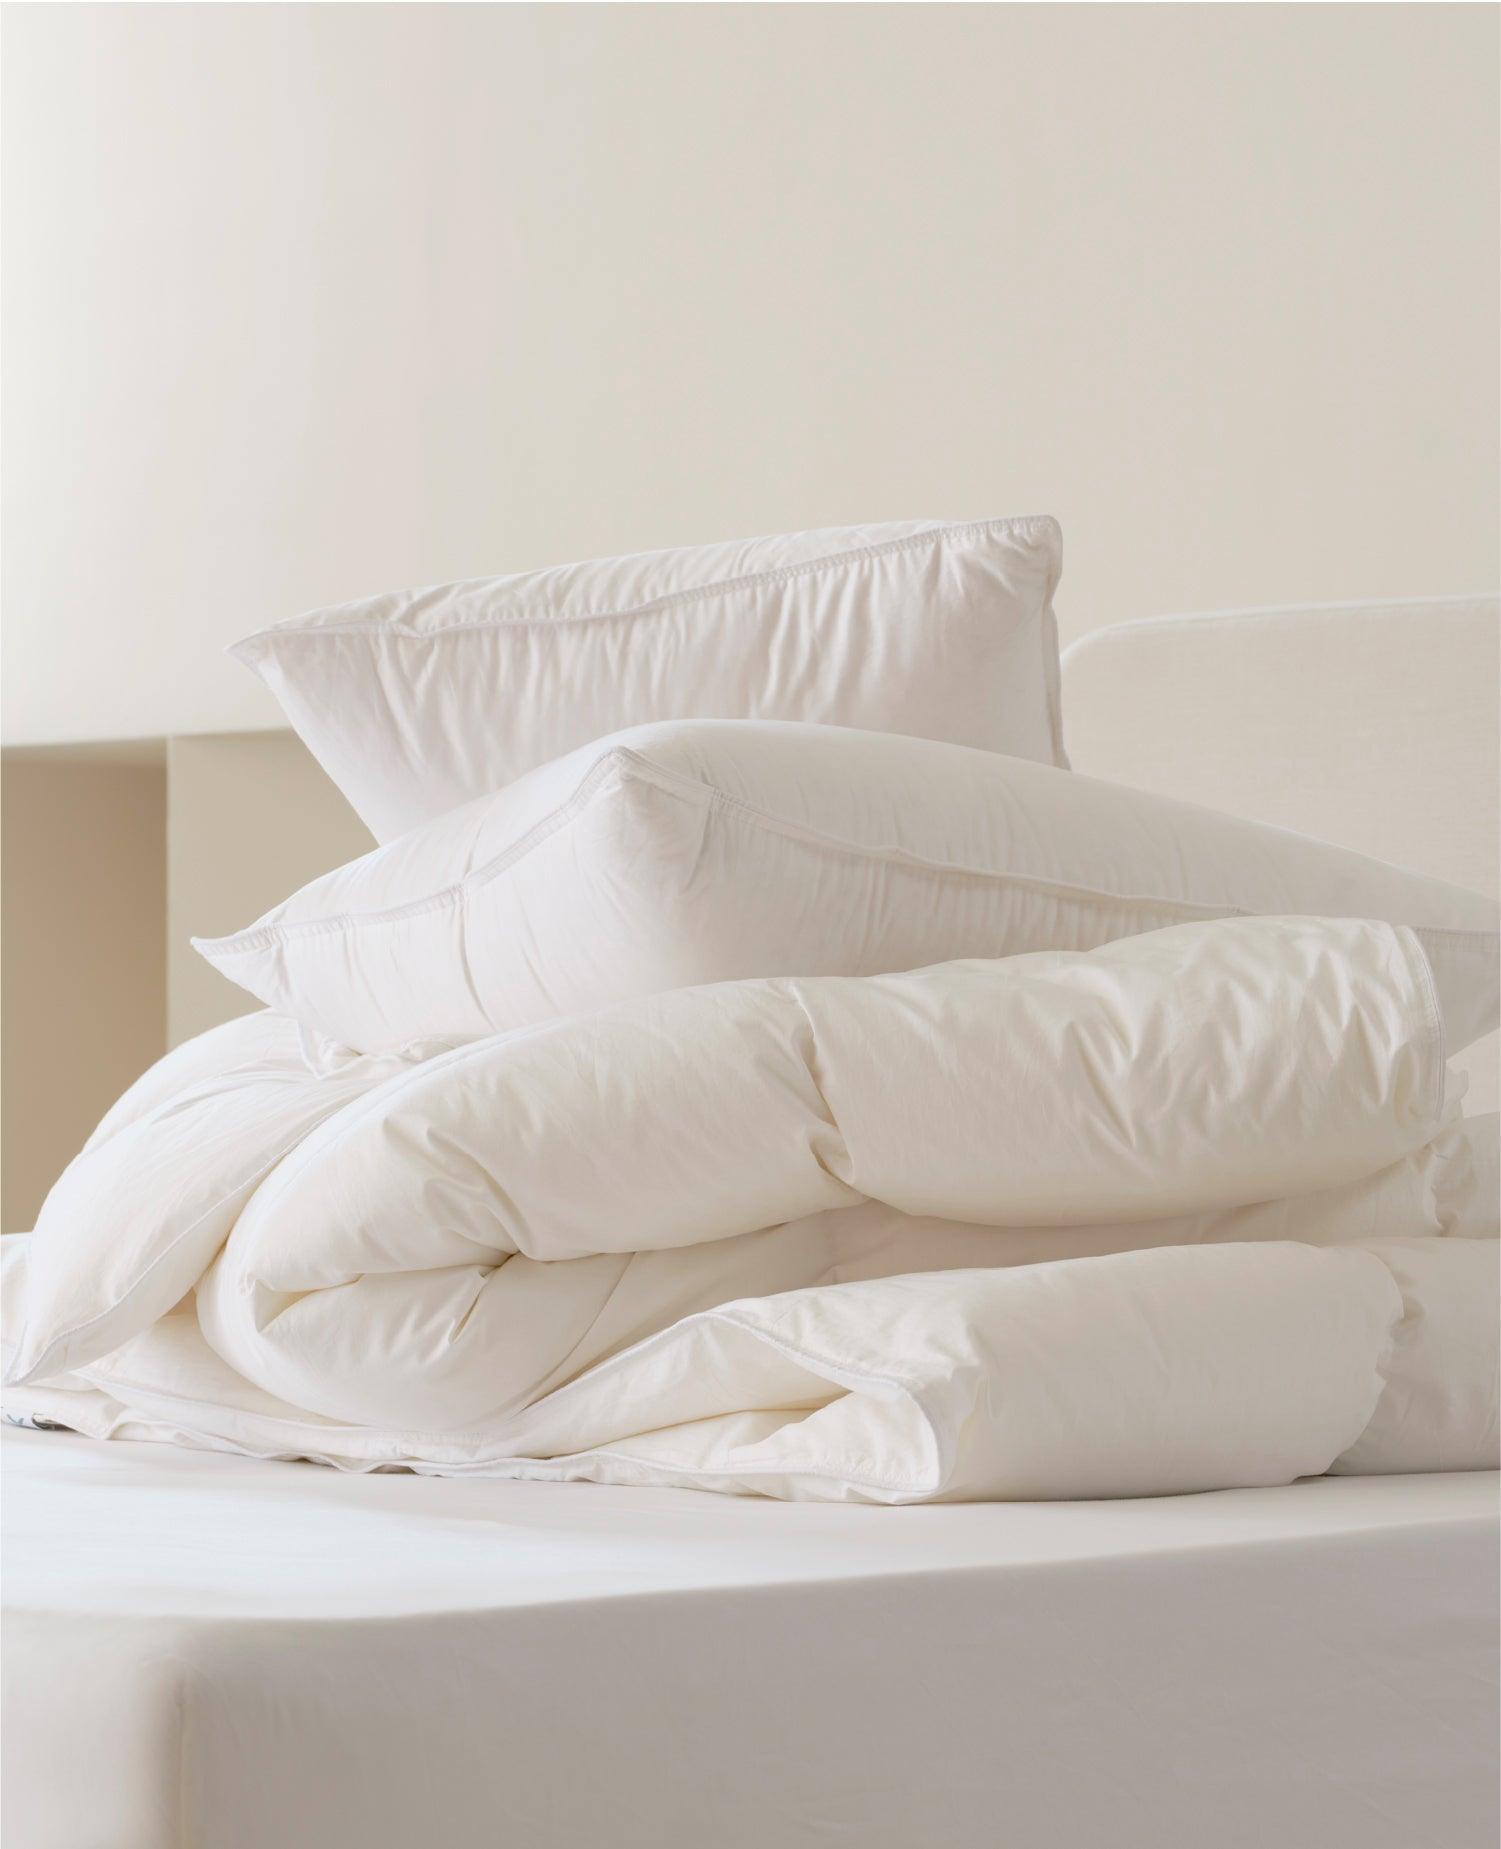 Linen Lyocell Complete Bedding Bundle - Double Stitch By Bedsure